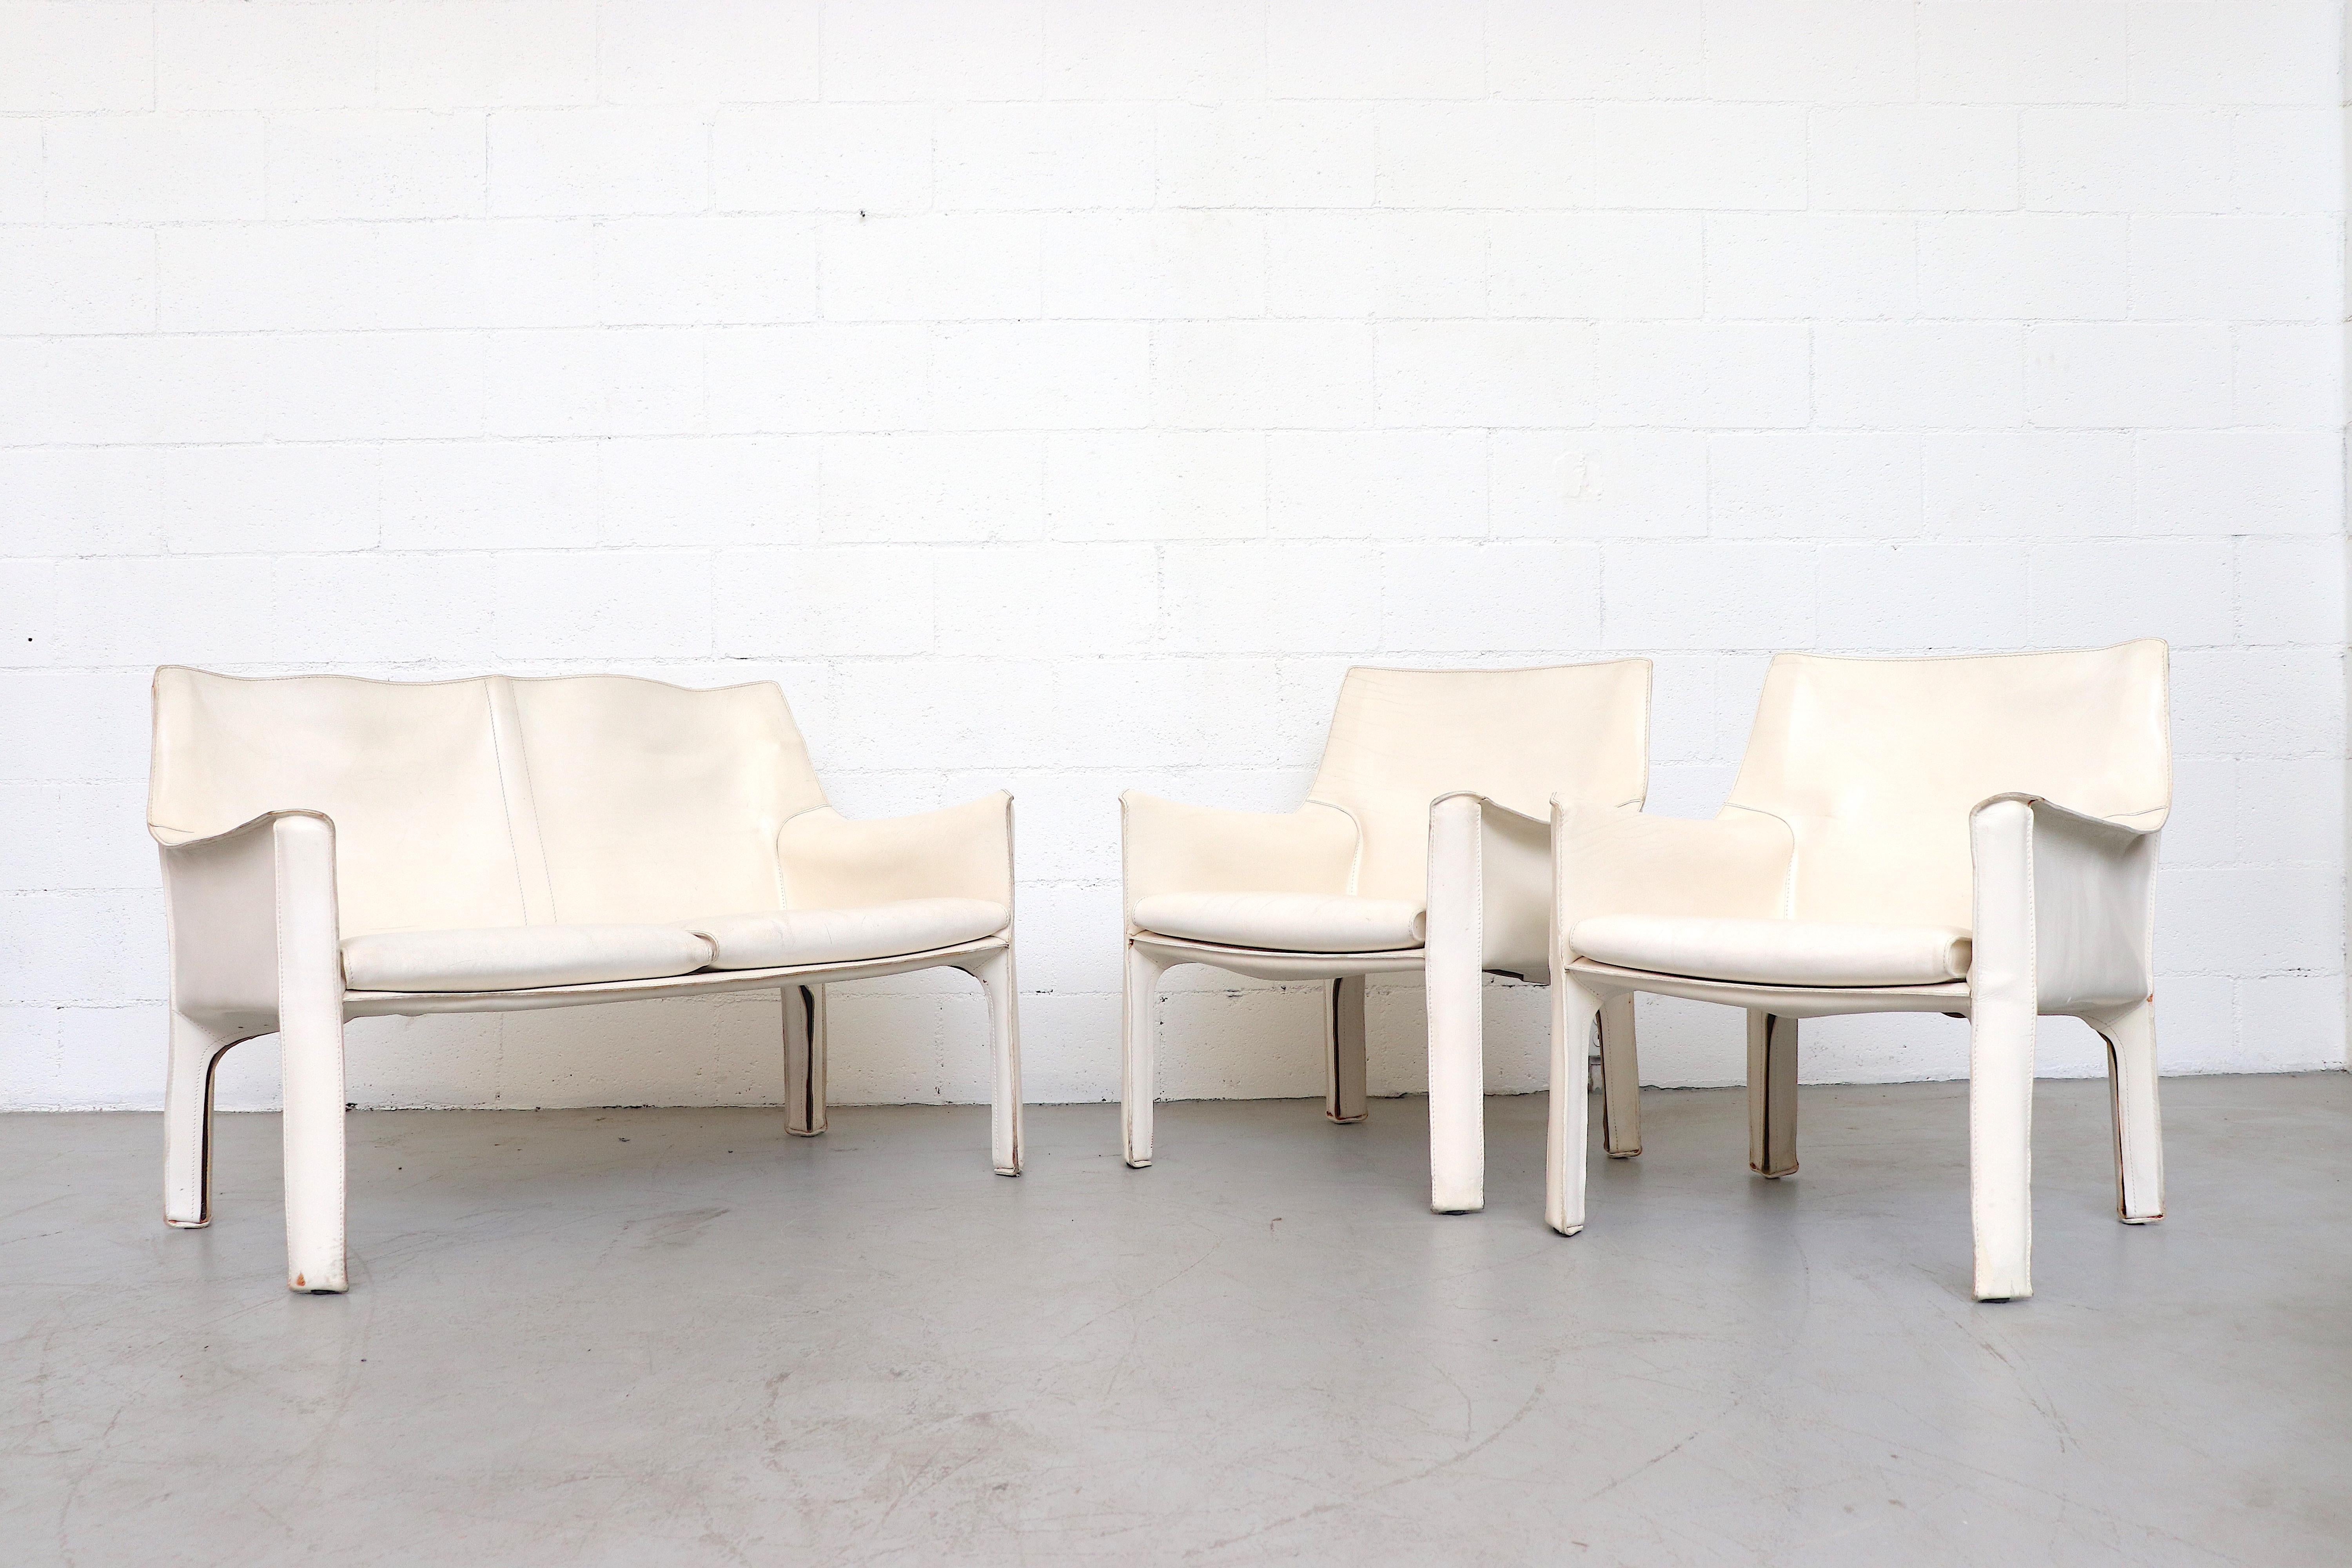 Pair of Mario Bellini white leather cab chairs for Cassina. In very original condition with visible signs of wear. Wear is consistent with their age and usage. Pictured with matching loveseat, listed separately. Set price.